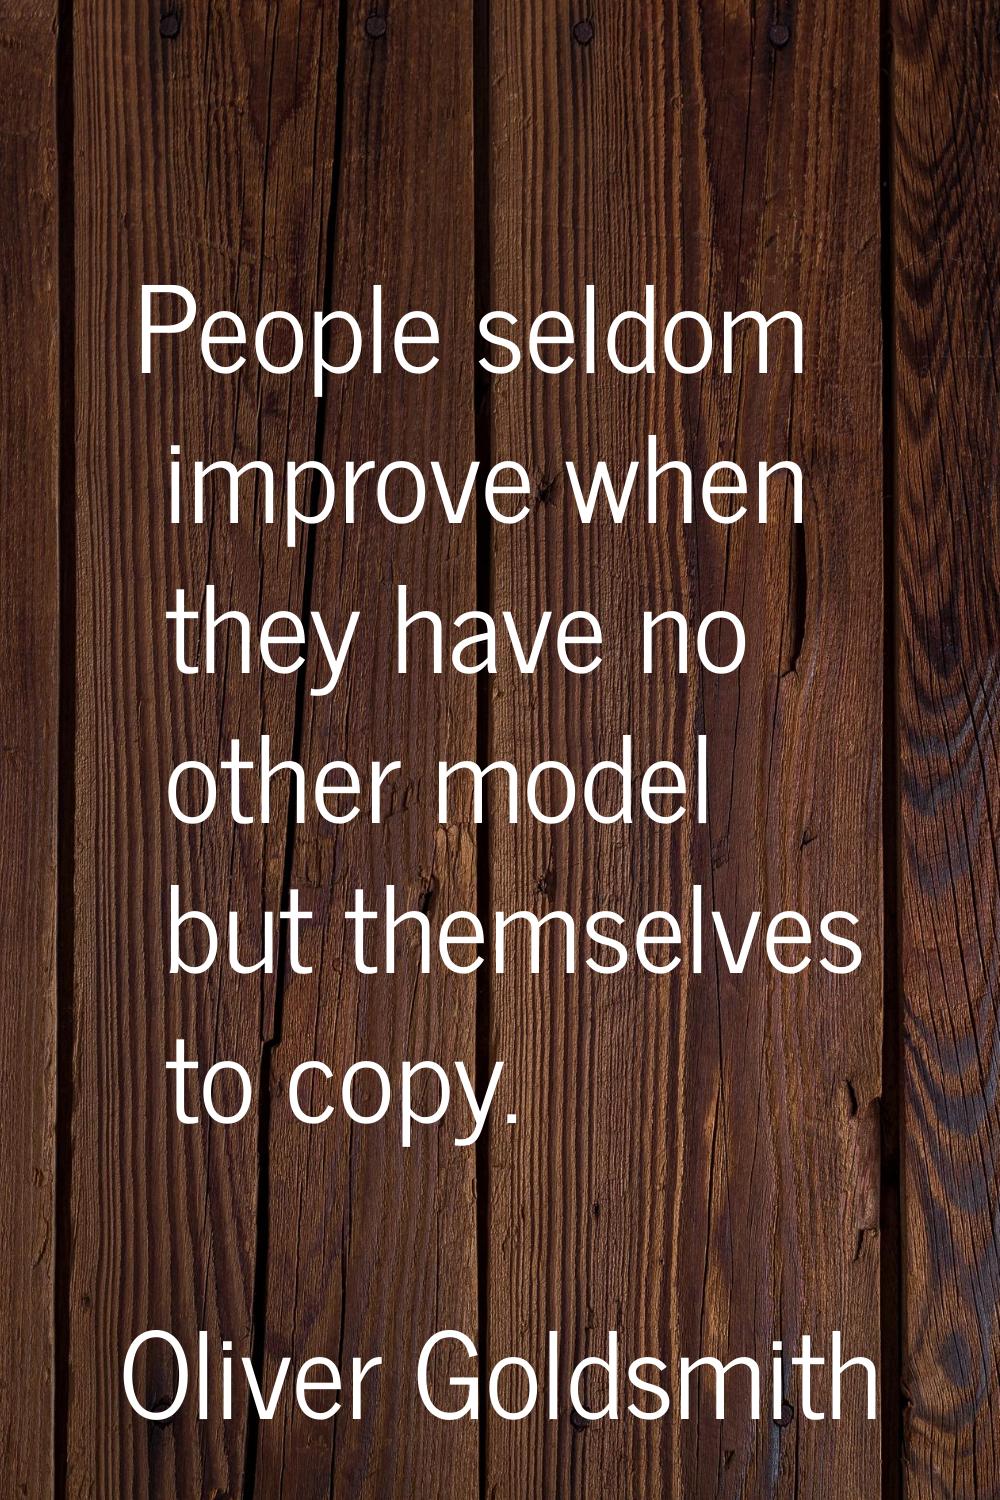 People seldom improve when they have no other model but themselves to copy.